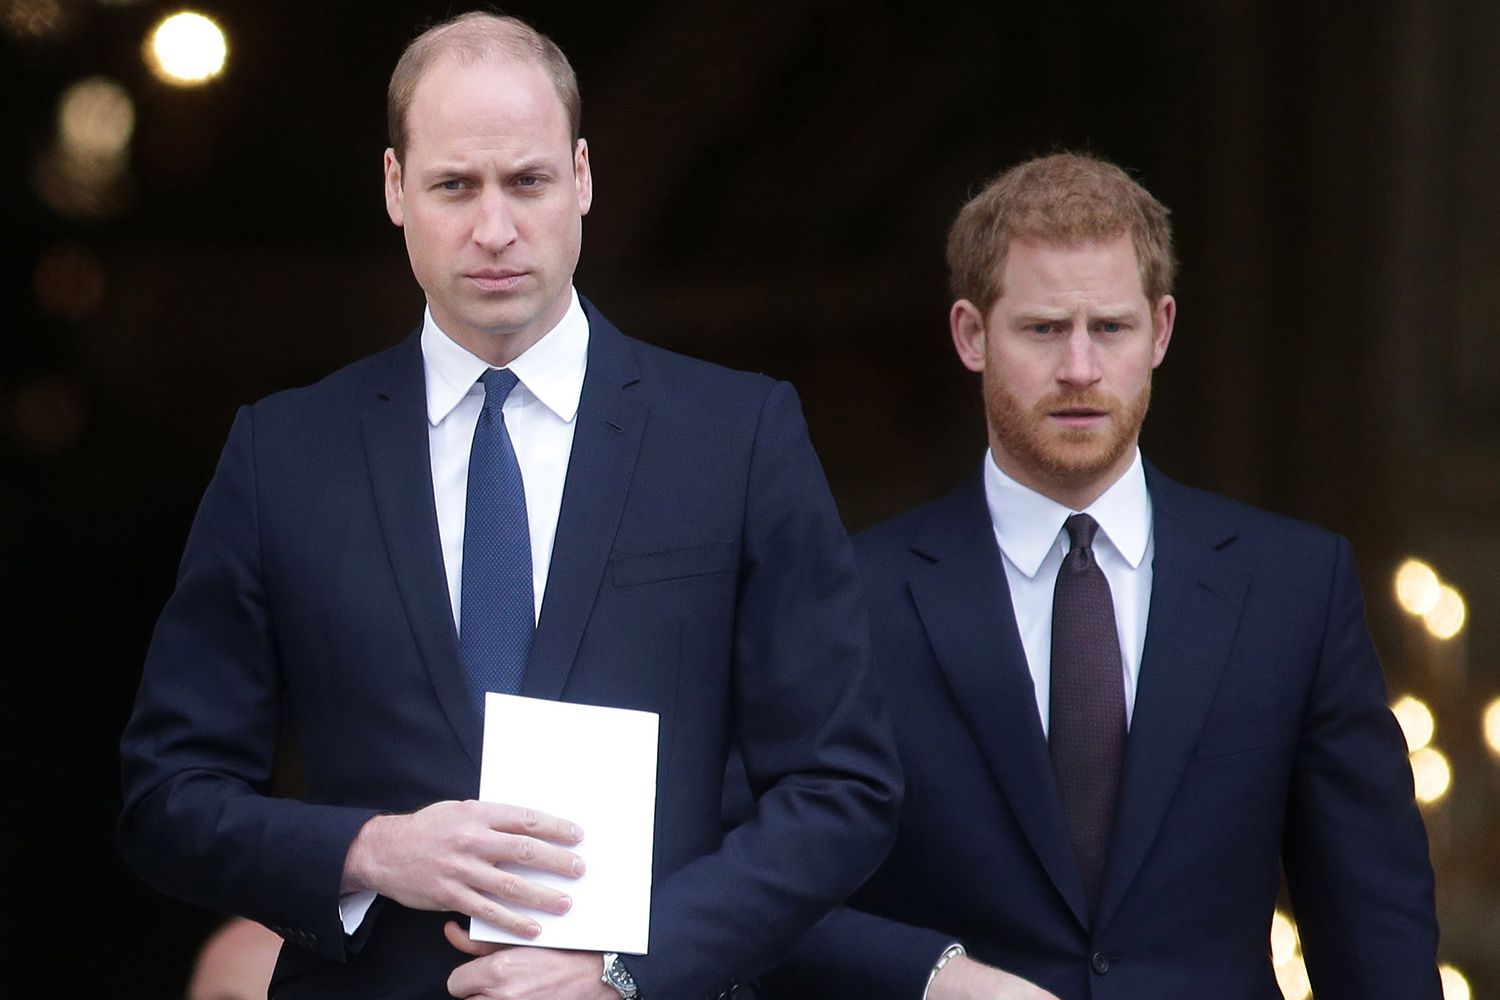 William And Harry's Surprising Act In The Hospital